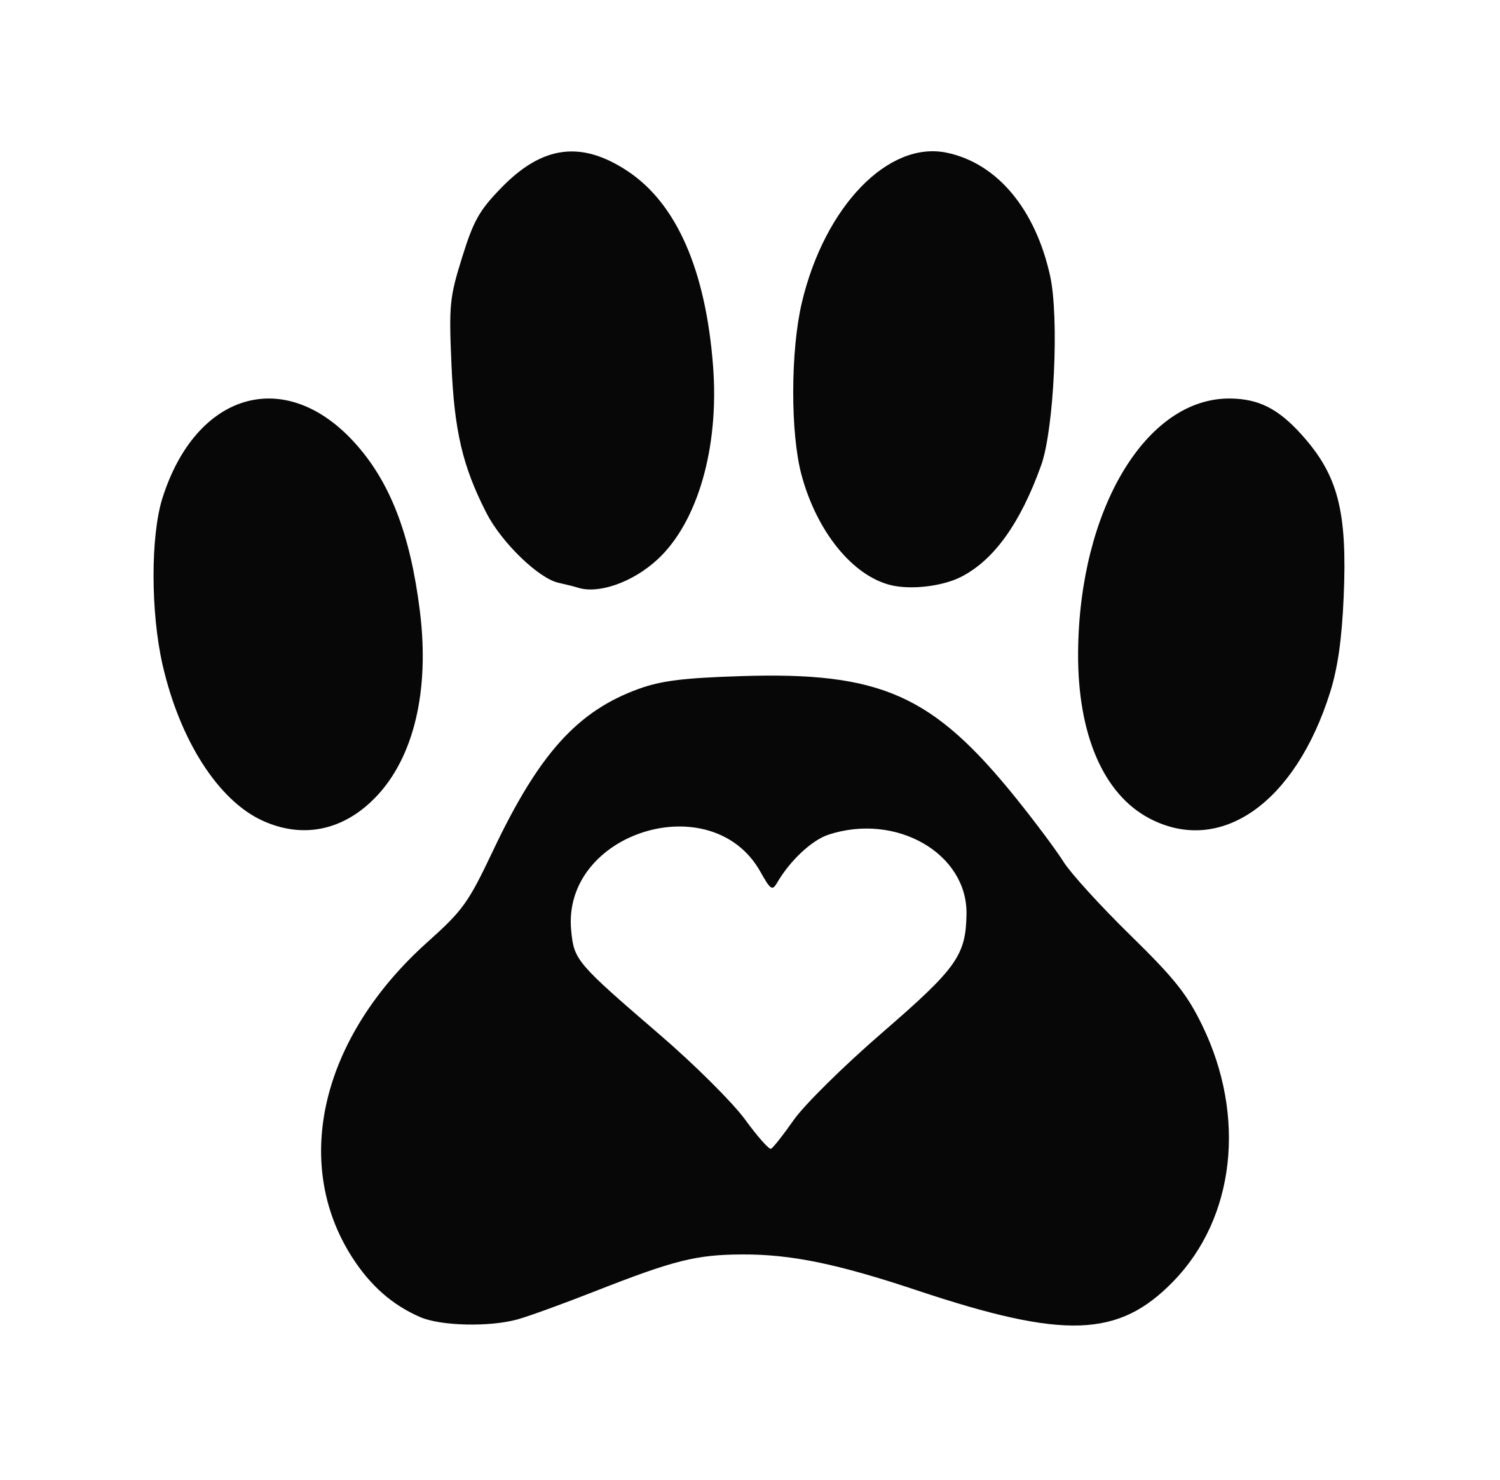 Dog paw heart decal by LundtLetteringDesign on Etsy